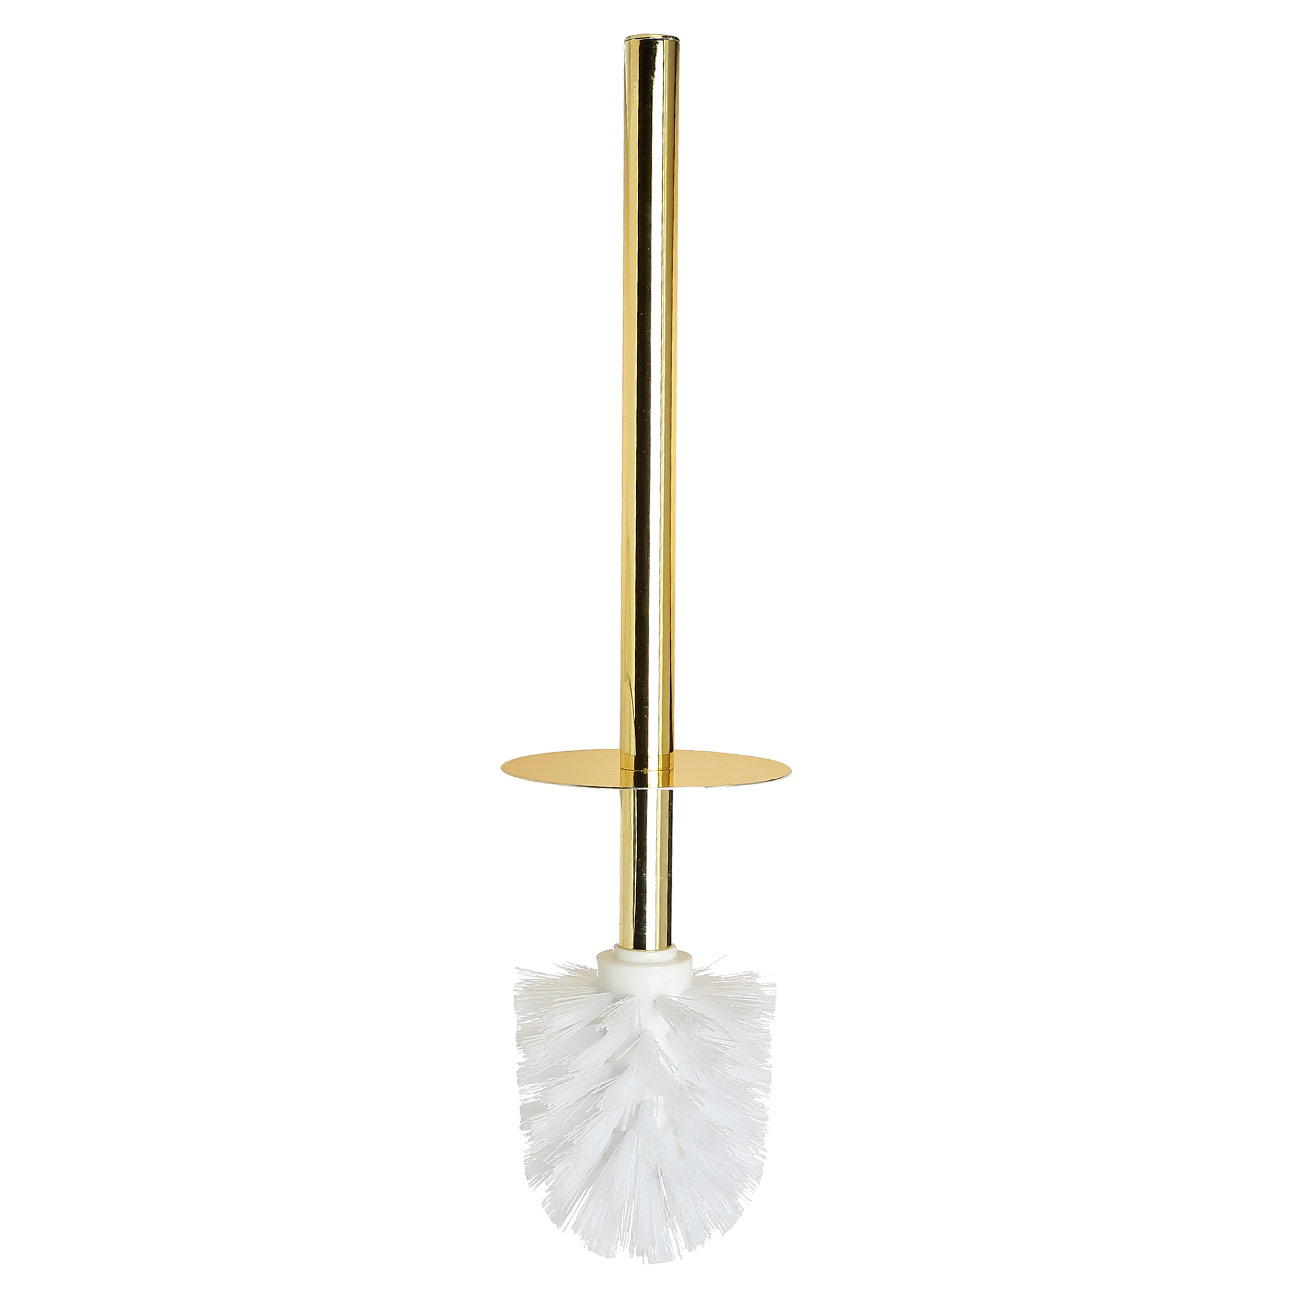 Toilet brush, 26 cm, with stand, plastic / ceramic, white and gold, Freya изображение № 3